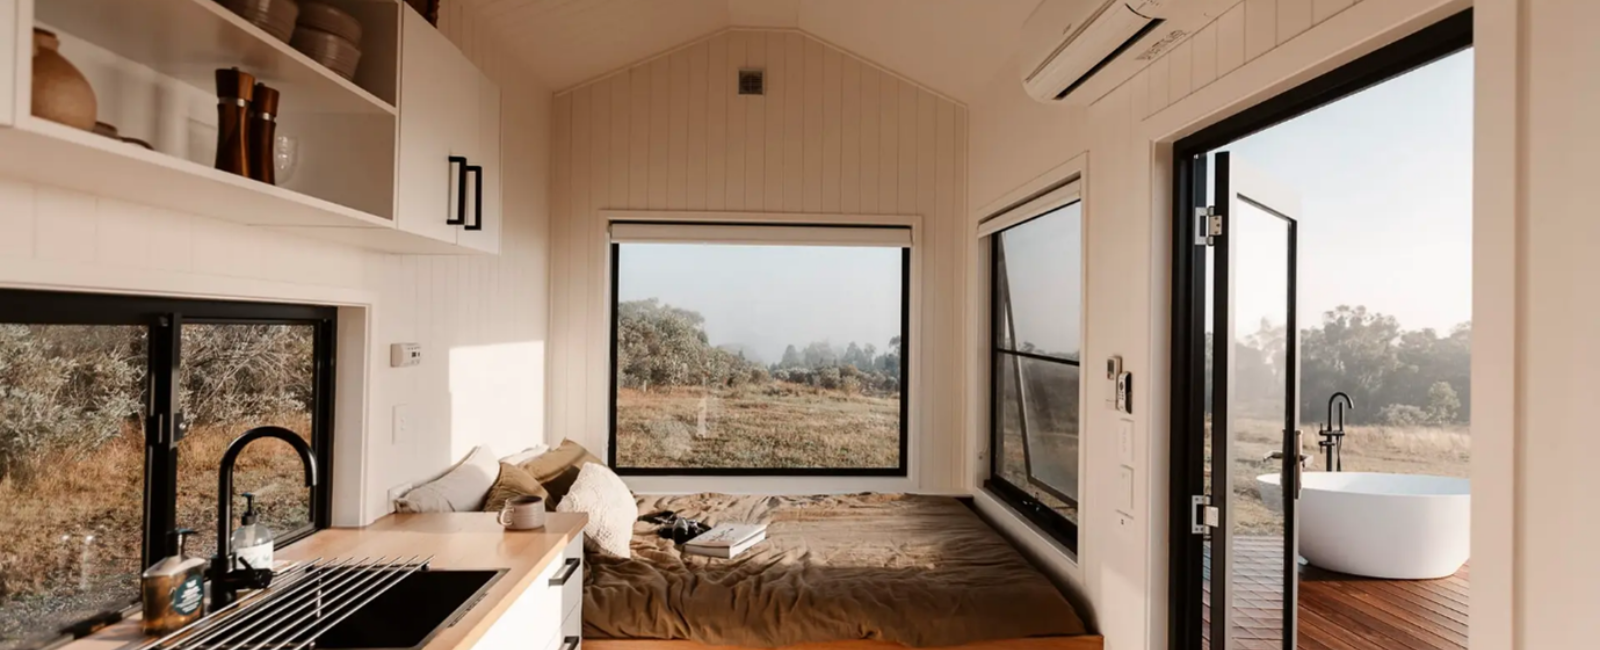 Inside view of Into the Wild tiny house